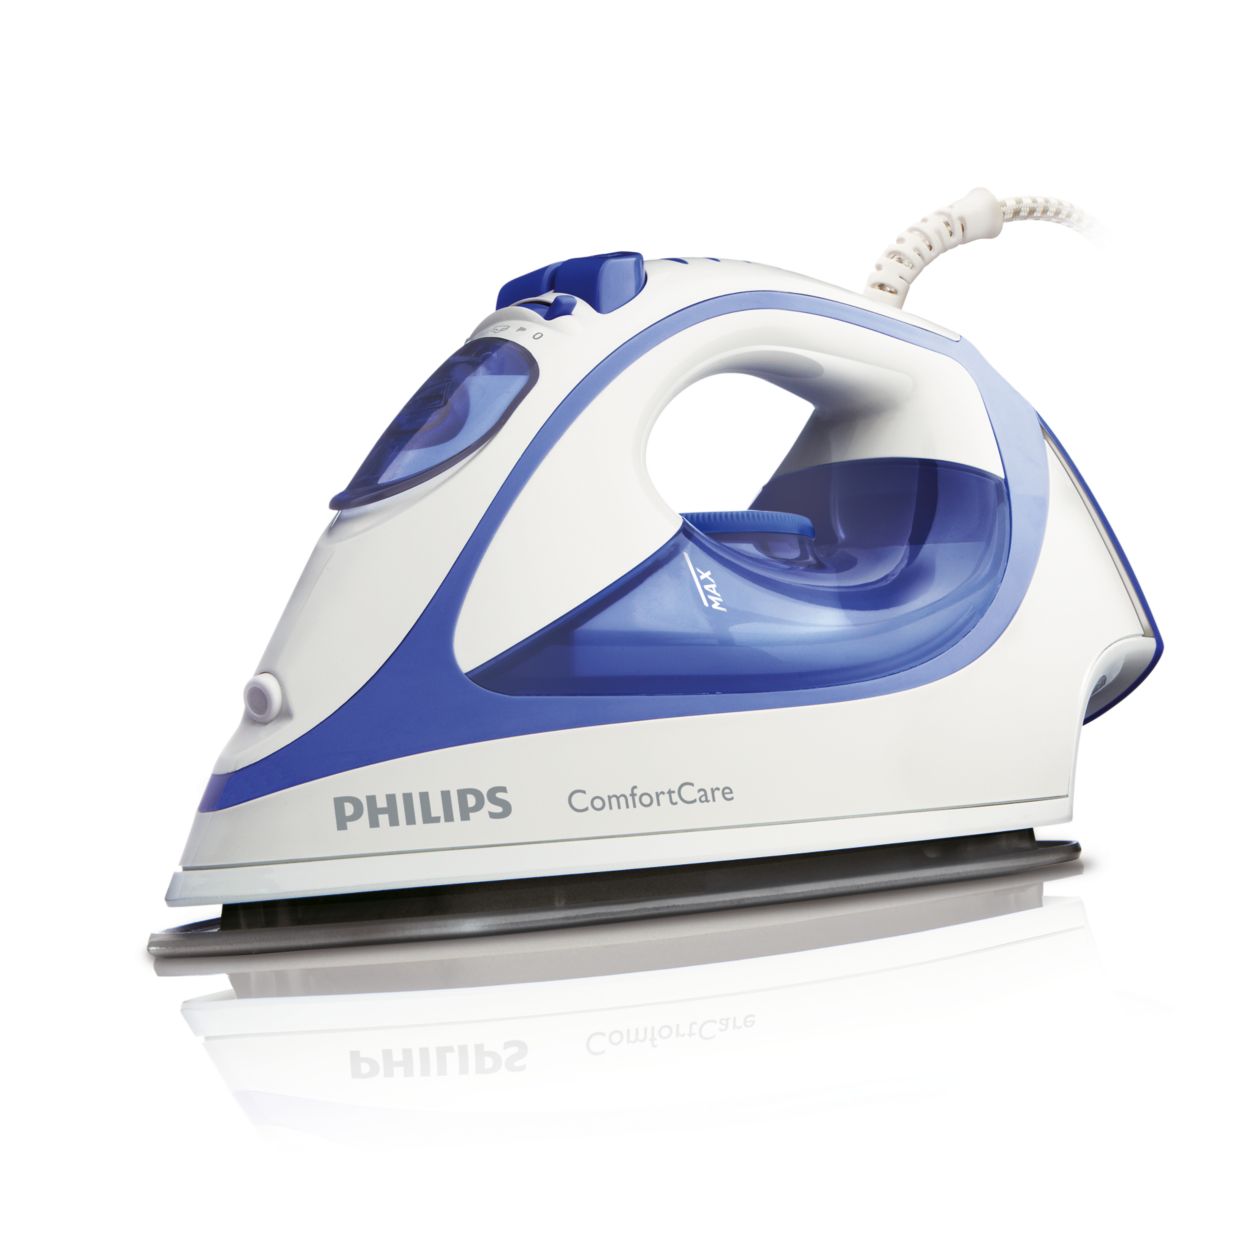 https://images.philips.com/is/image/philipsconsumer/14112e3a63f04185bc67ad2a00b69ca9?$jpglarge$&wid=1250